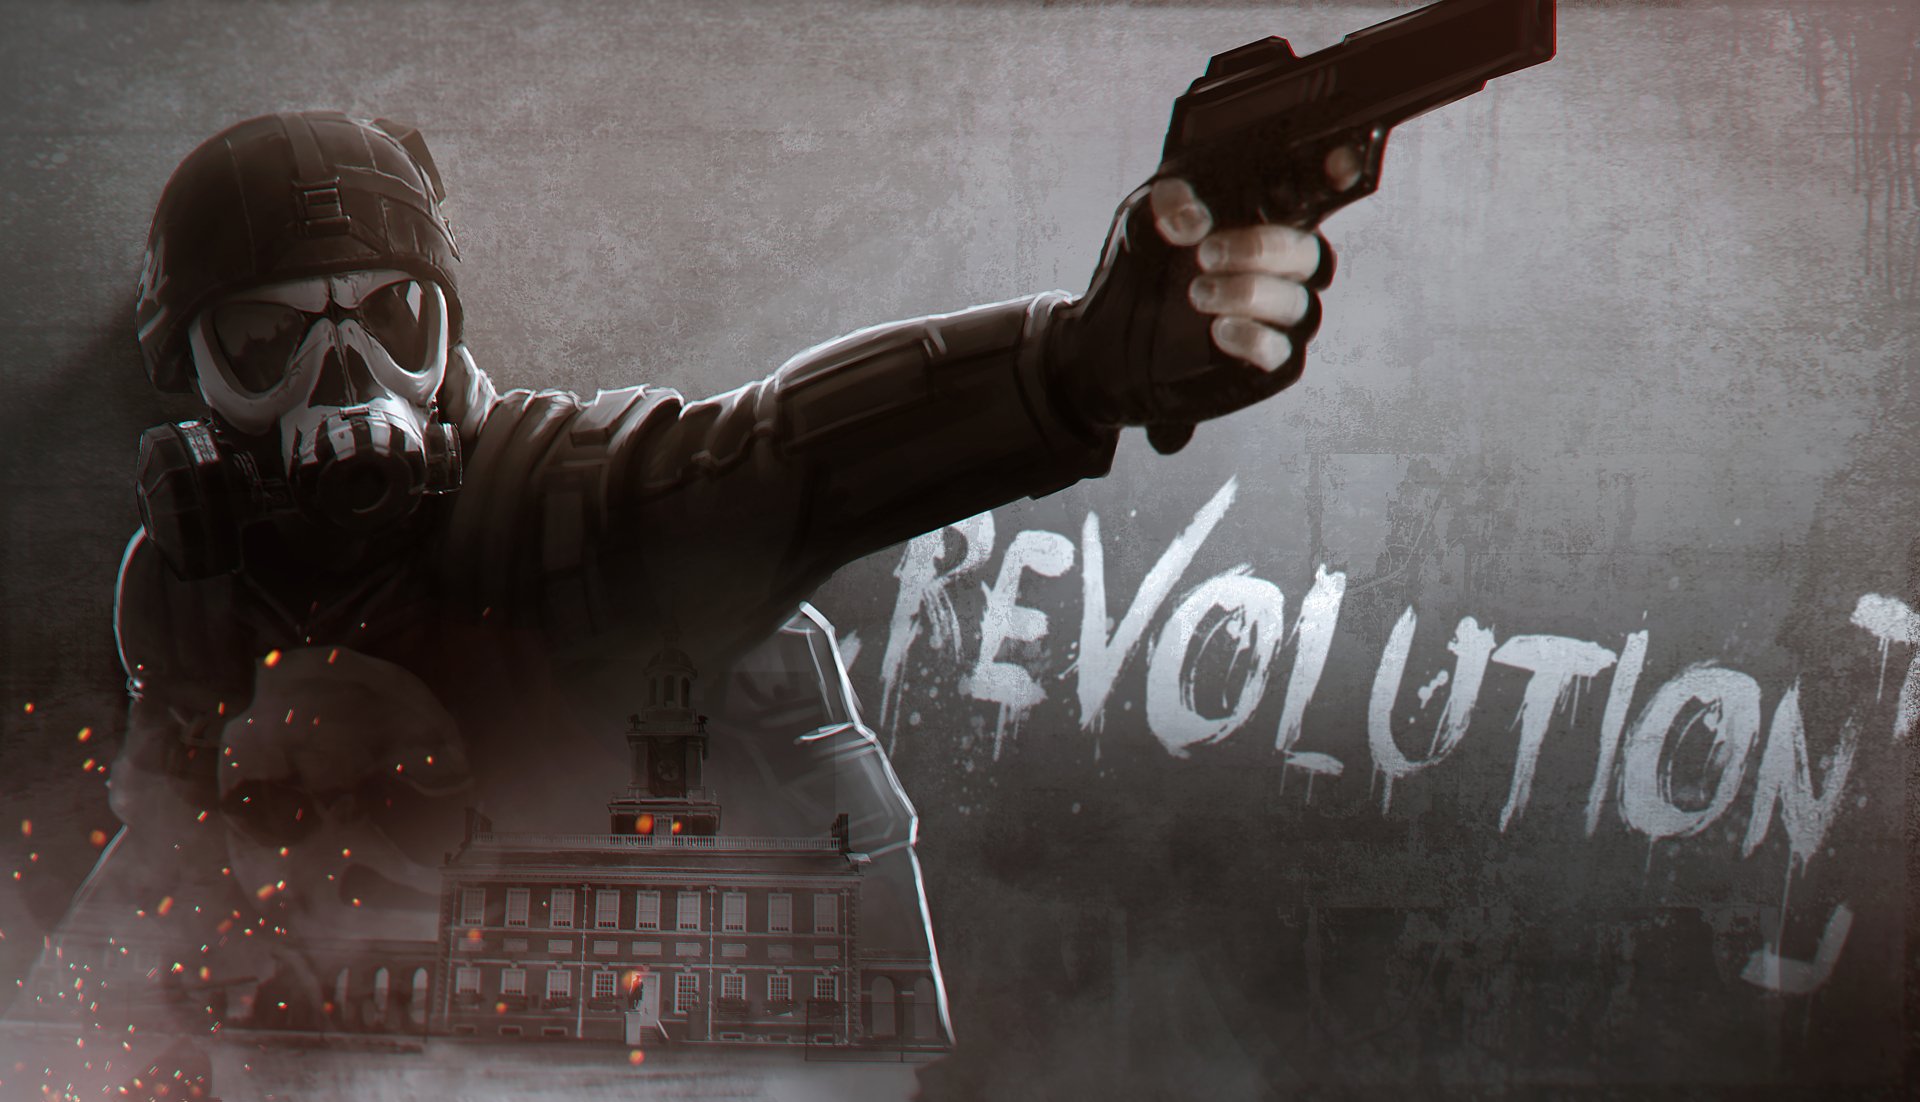 homefront the revolution download free